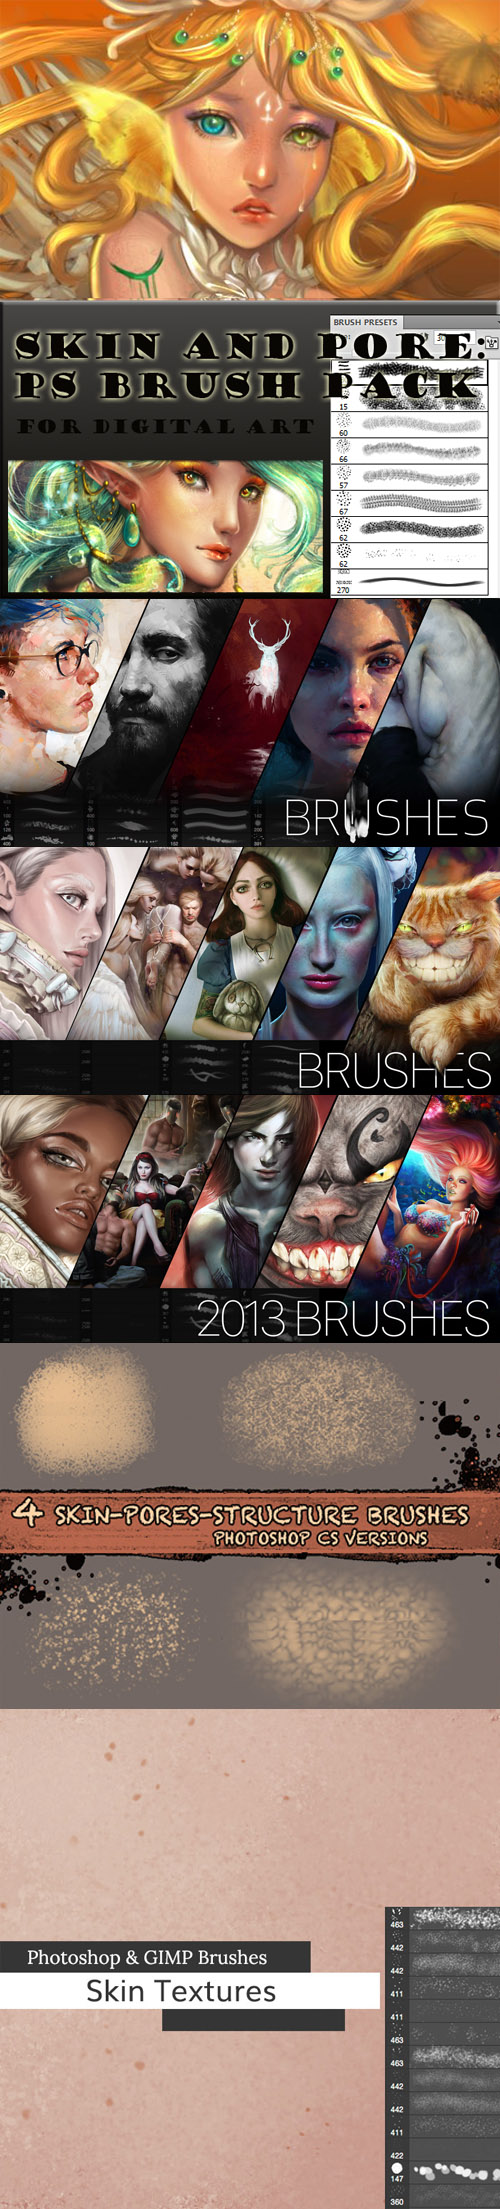 Skin Texture & Pore Brushes for Photoshop